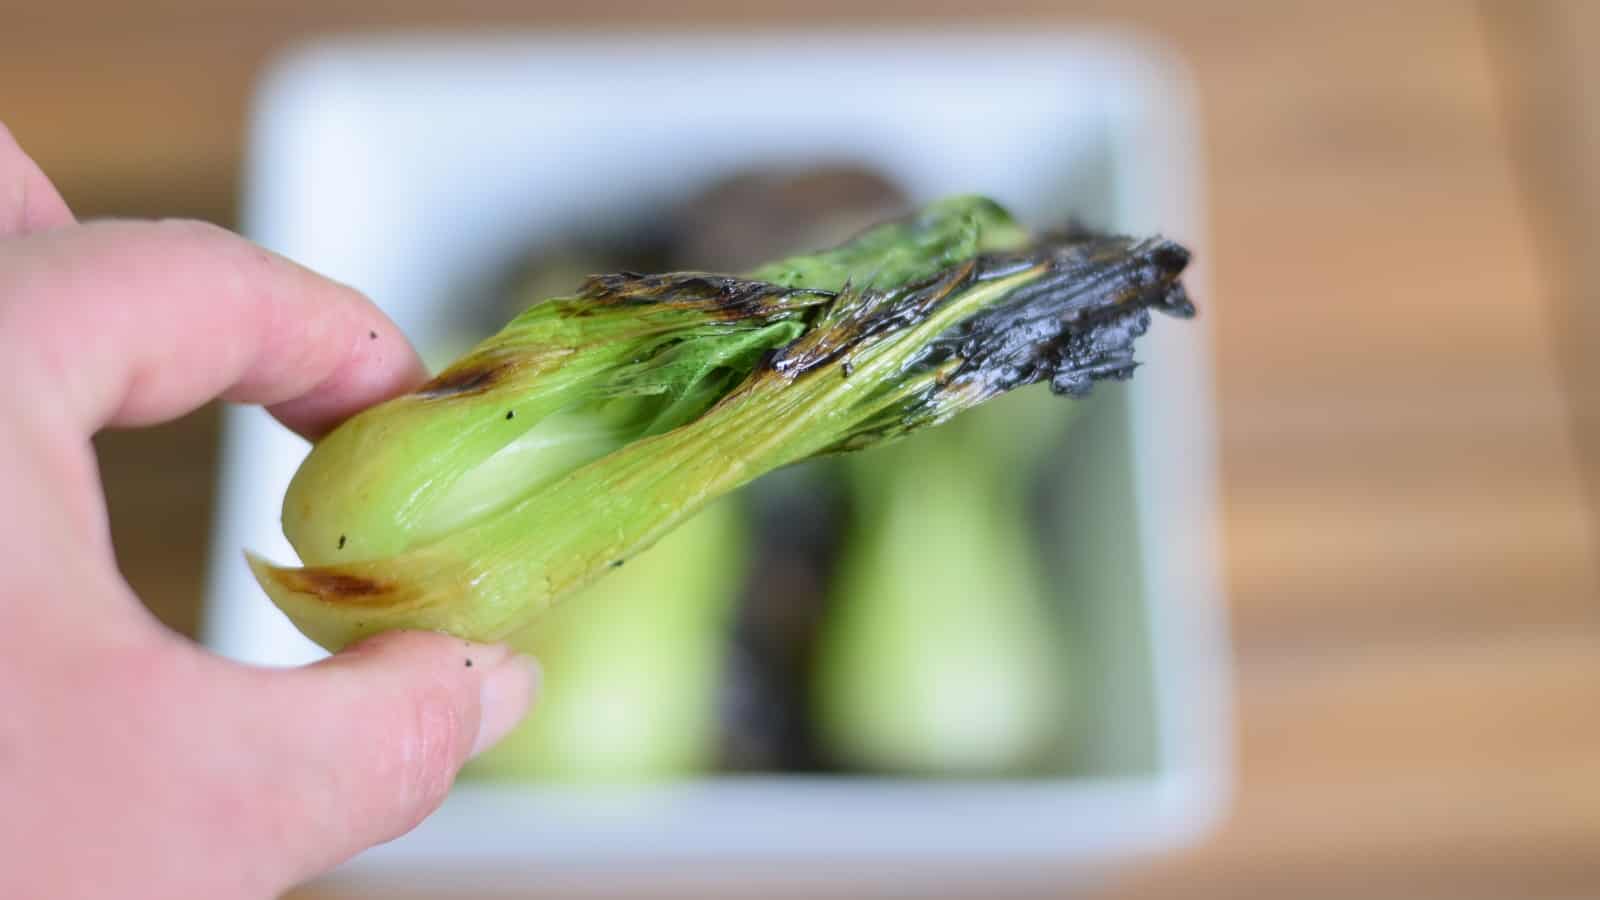 Image shows a hand holding a piece of grilled baby bok choy over a bowl containing more bok choy.